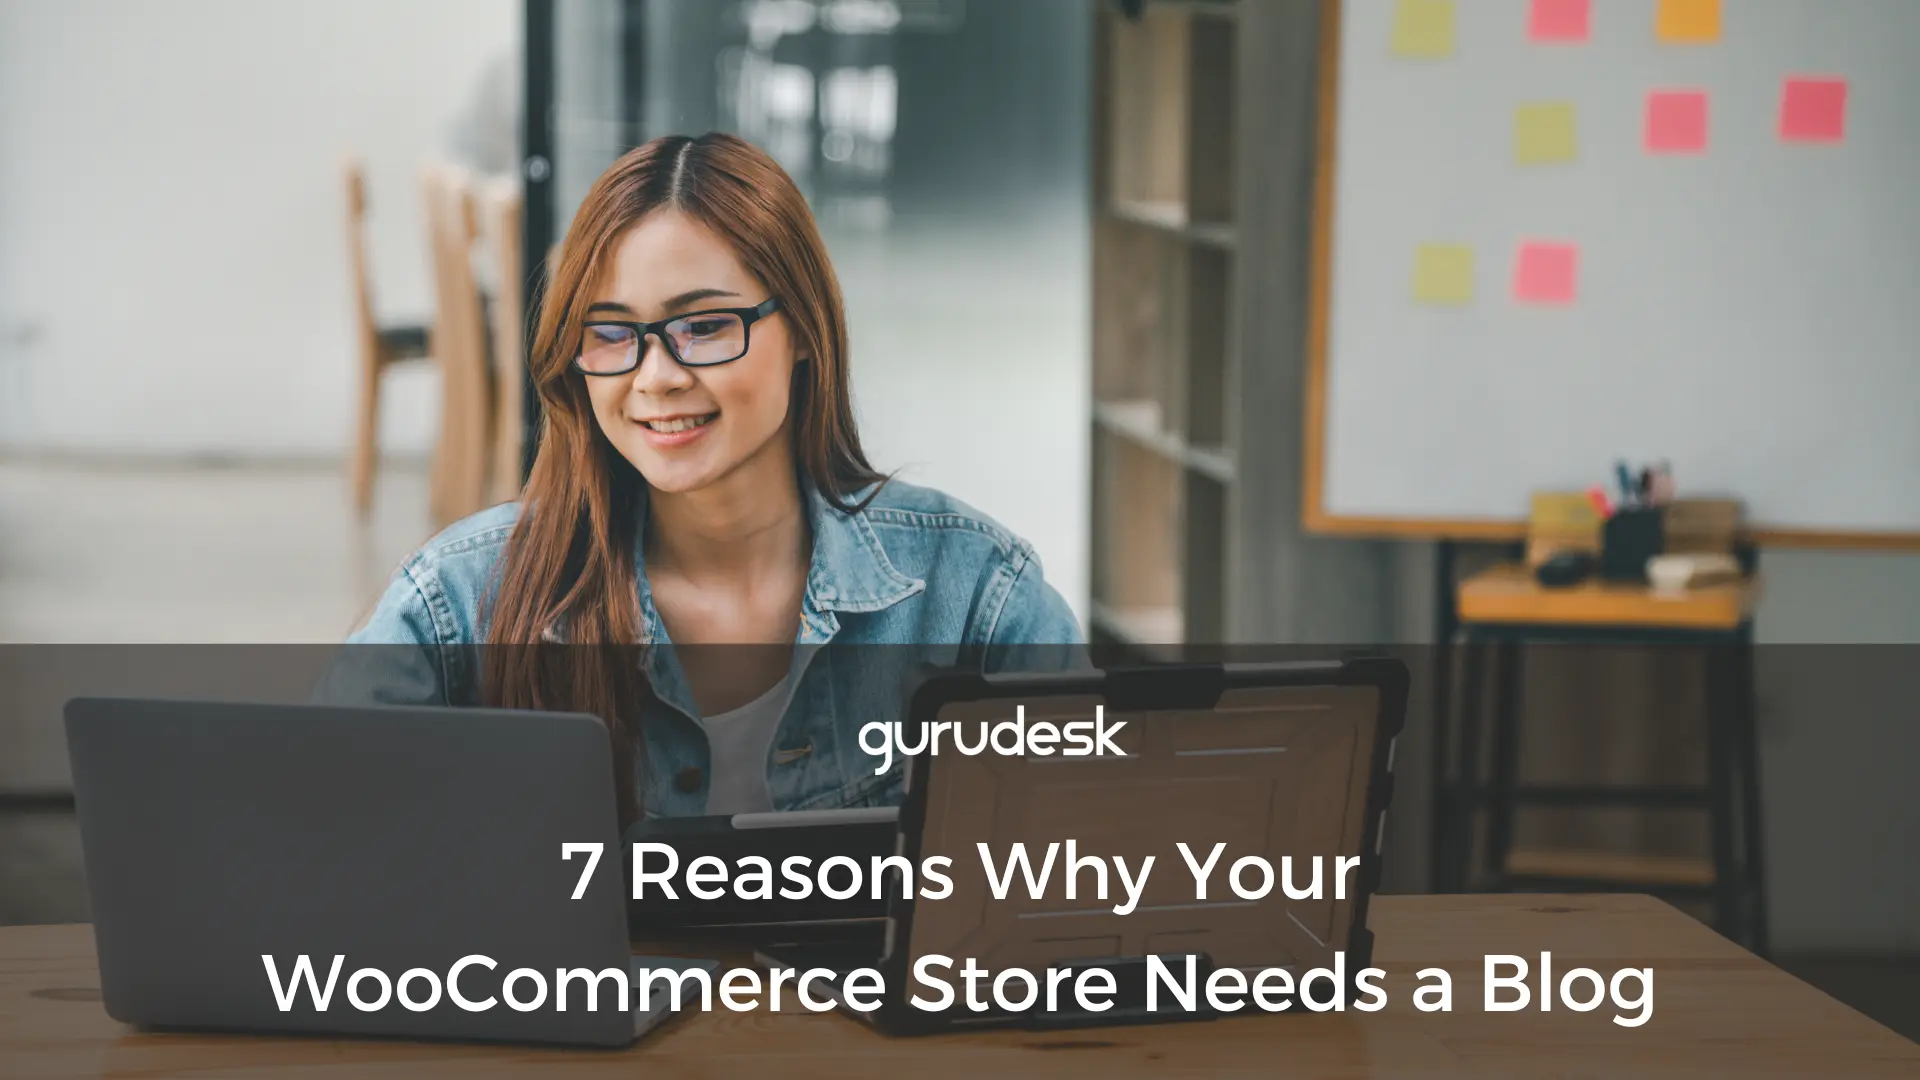 7 reasons why your WooCommerce Store needs a blog